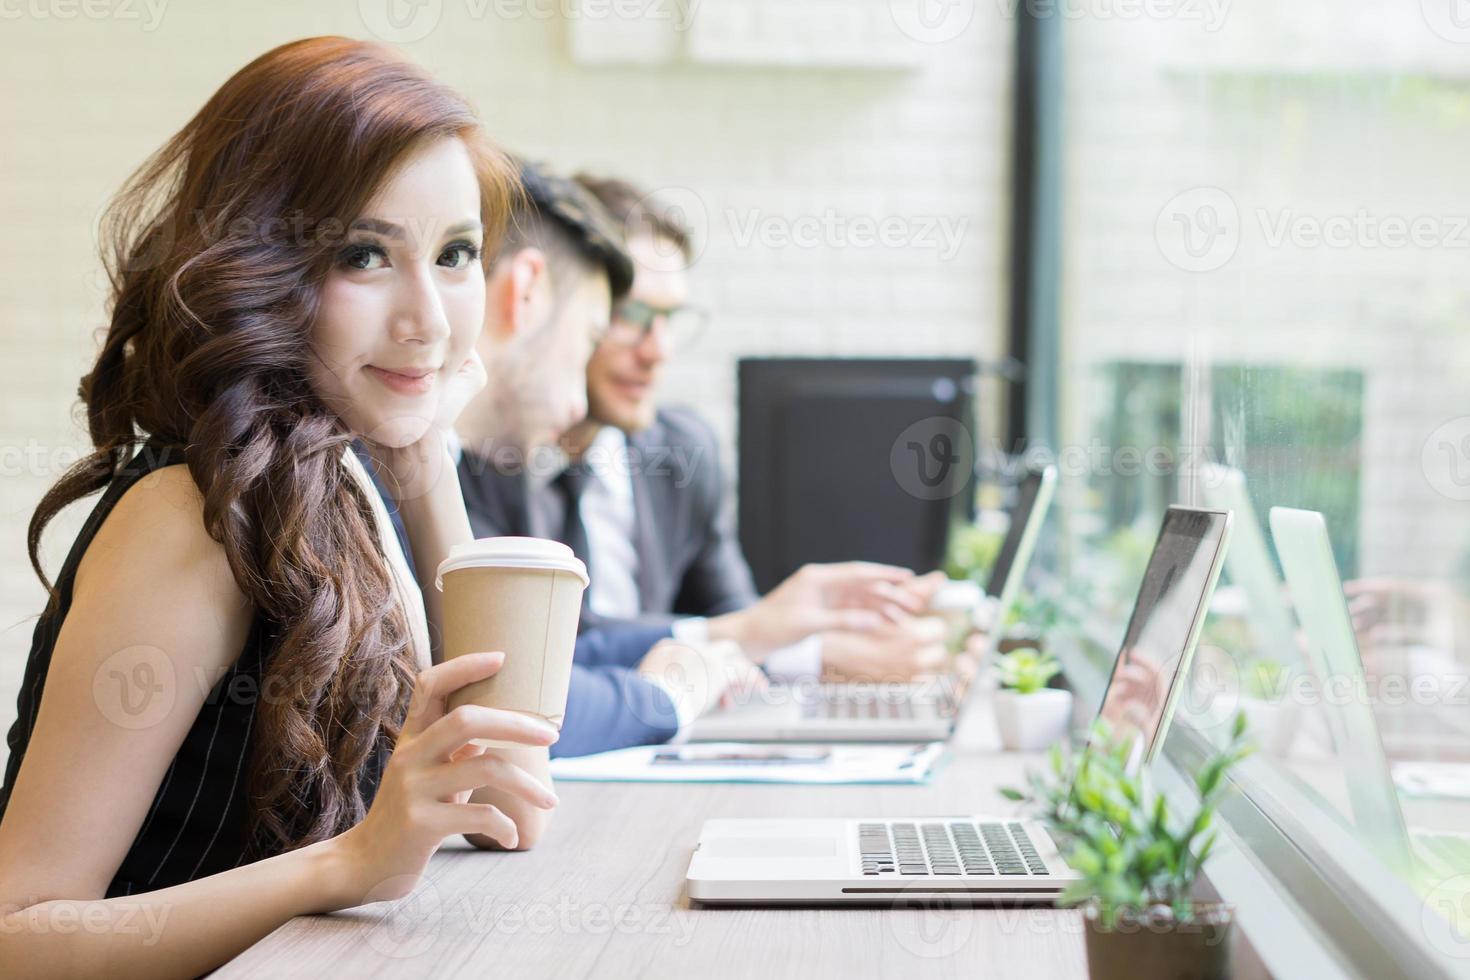 Businesswoman drinking coffee looking at her laptop while co-workers interact in the background photo